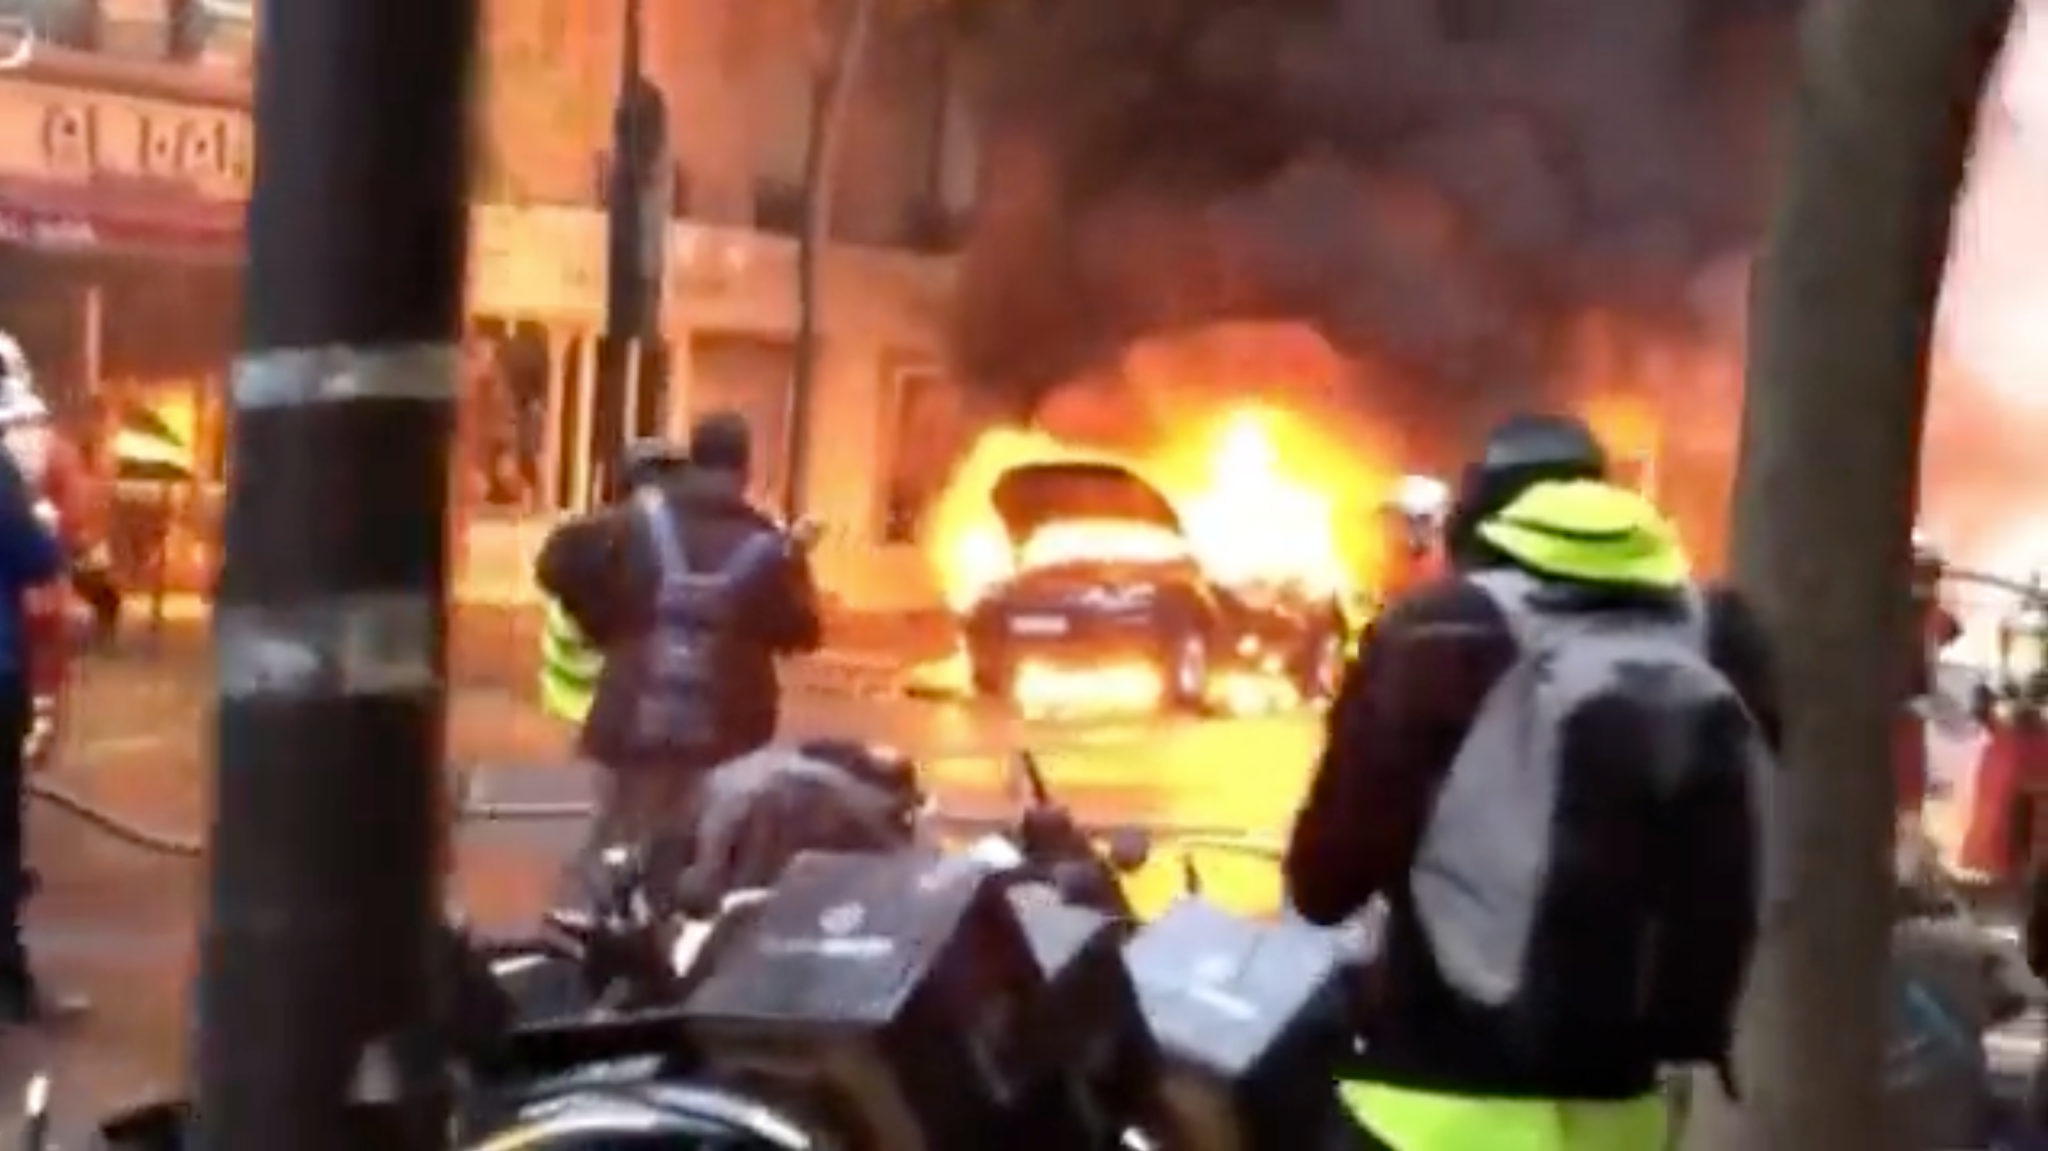 Paris Burns As Police Attack Anti-Globalist Protesters